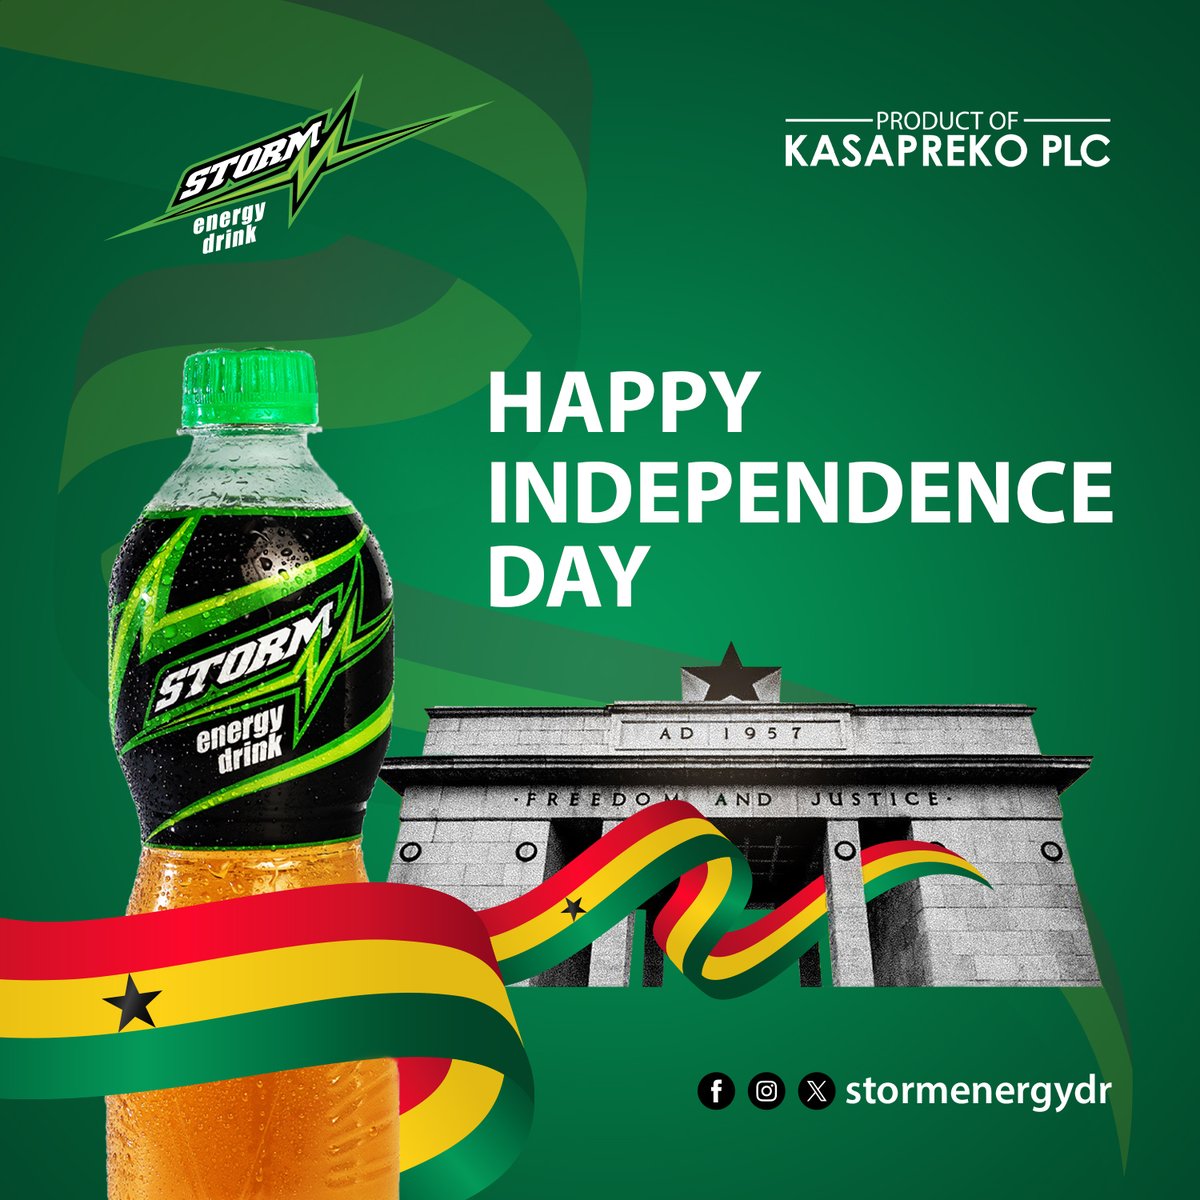 Cheers to 67 years of resilience, progress, and unity! Happy Independence Day, Ghana! 🇬🇭✨ Stay energized with Storm Energy Drink! ⚡ #GhanaAt67 #IndependenceDay #6thmarch #shiba #shattawaleat3musictv #stormenergydrink